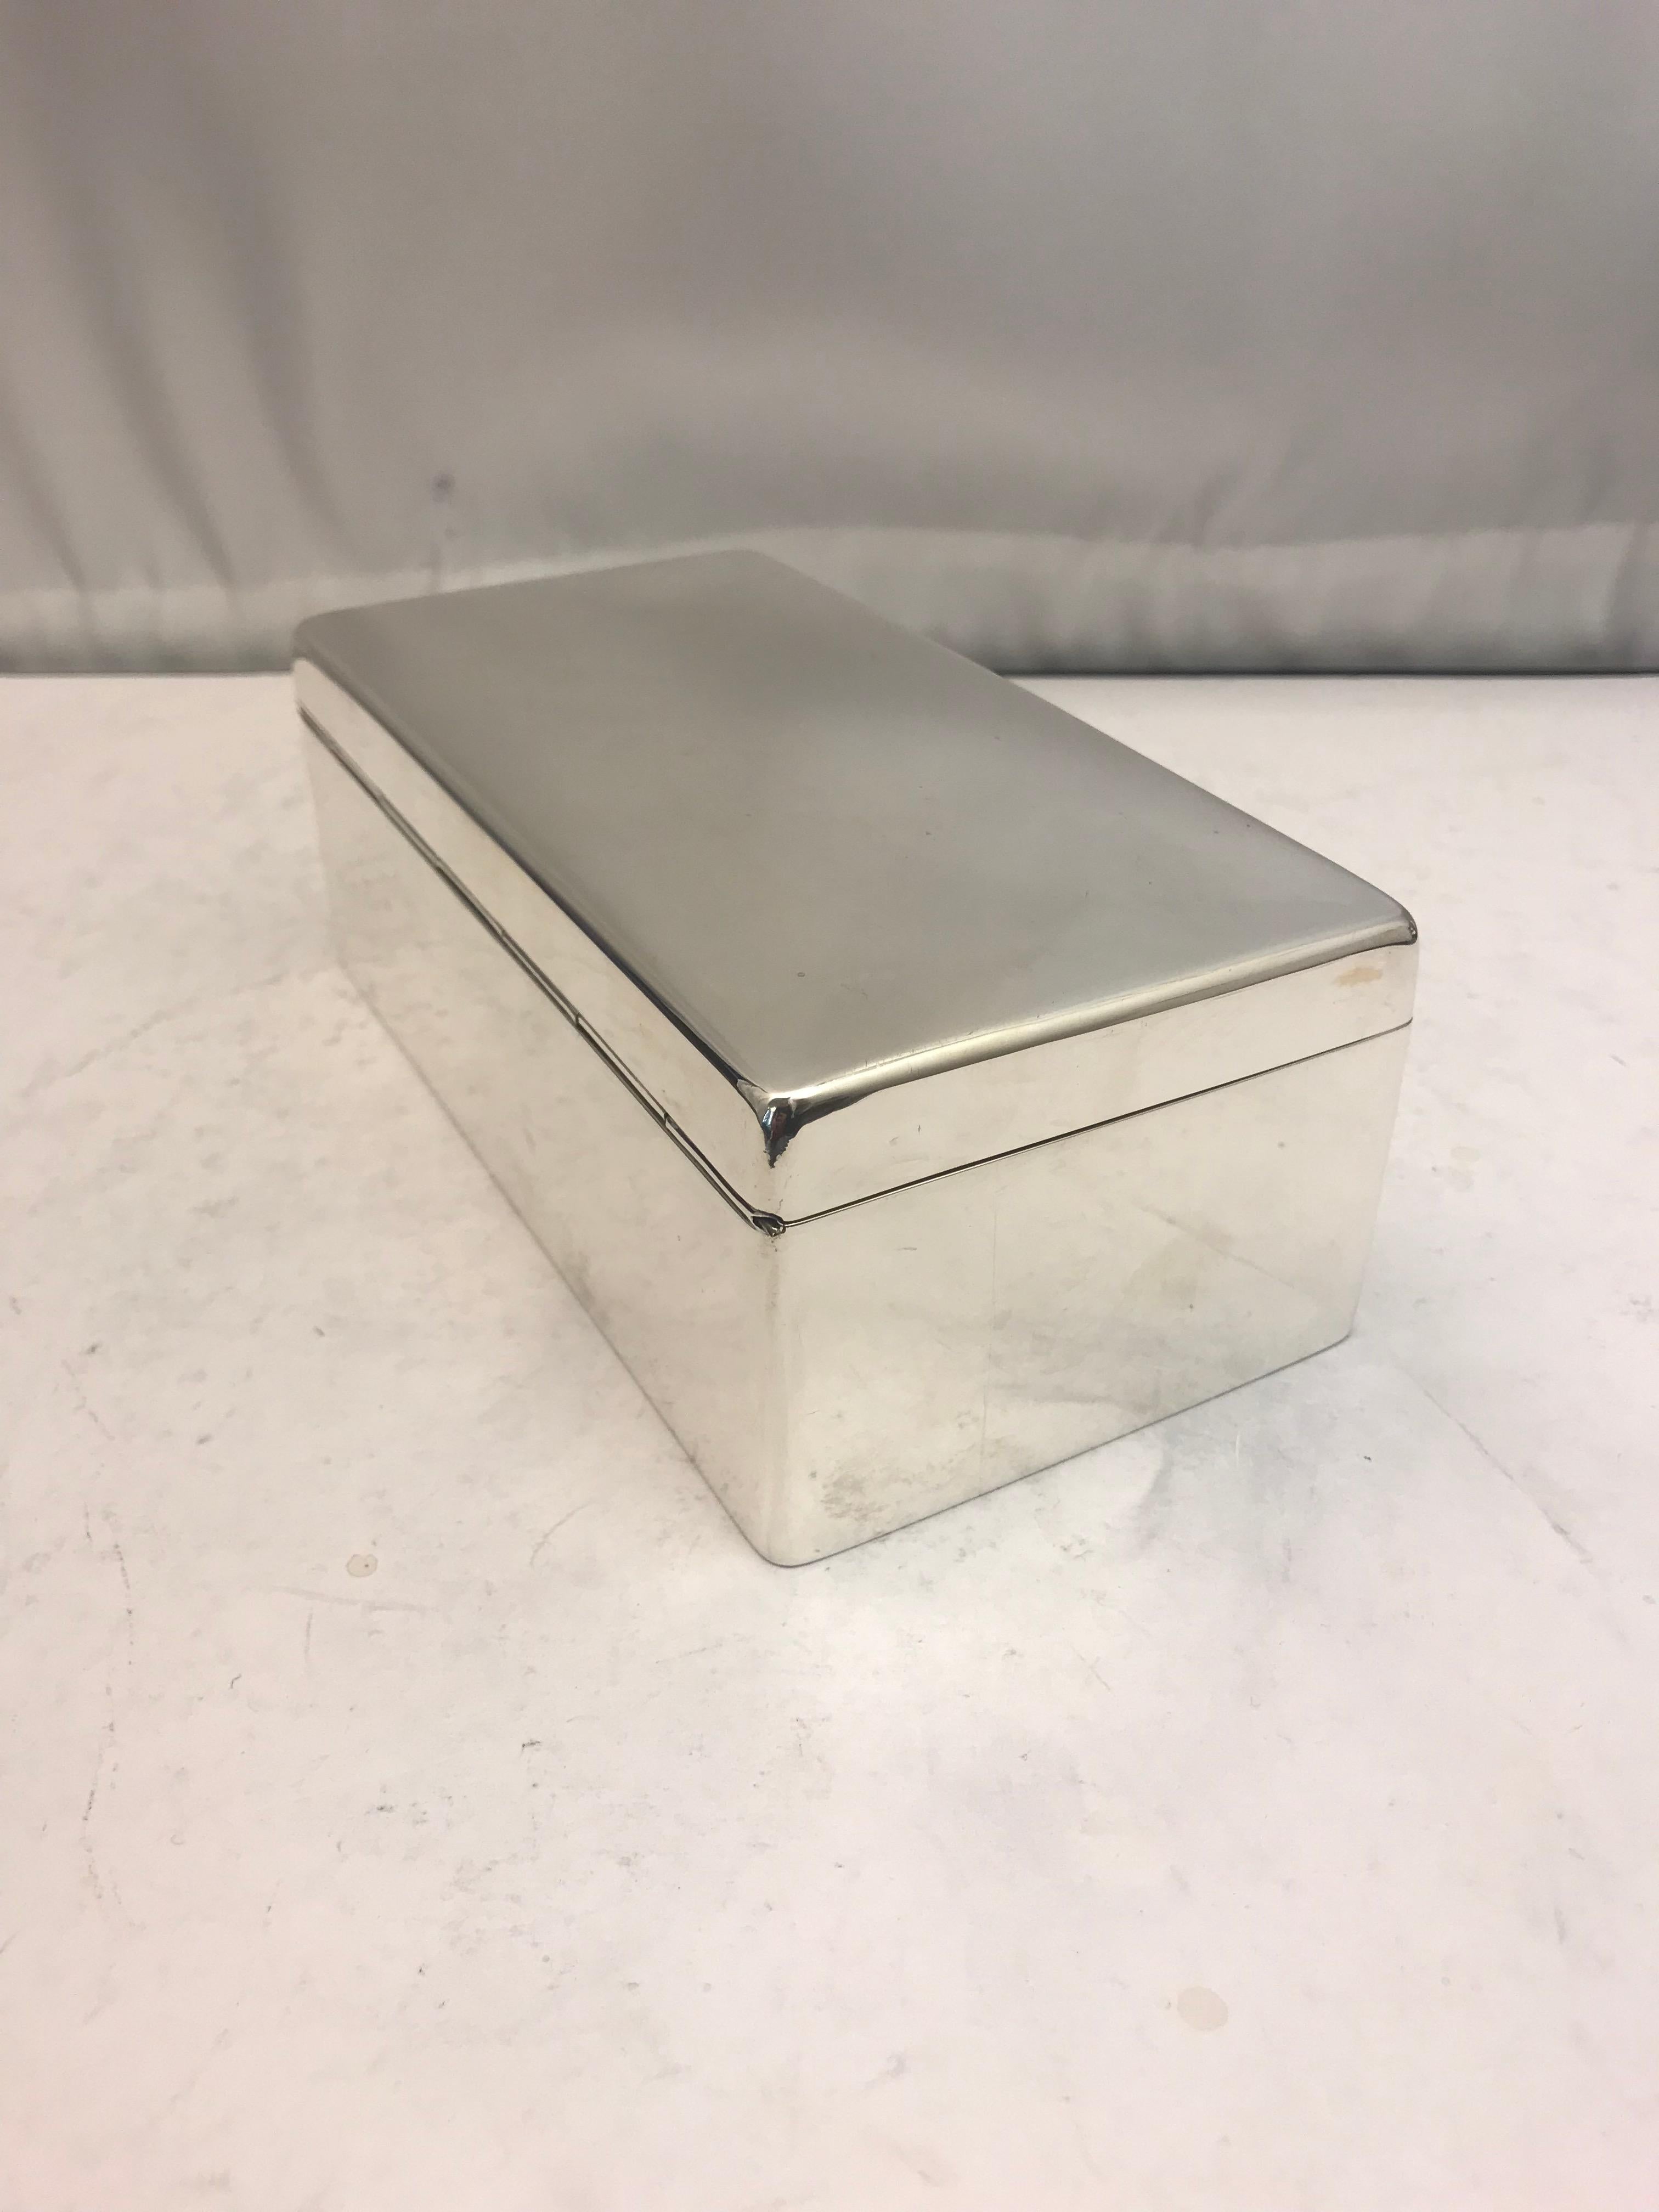 An antique plain style sterling silver box with a solid lid made by Zimmerman & Zimmerman, Birmingham 1908.